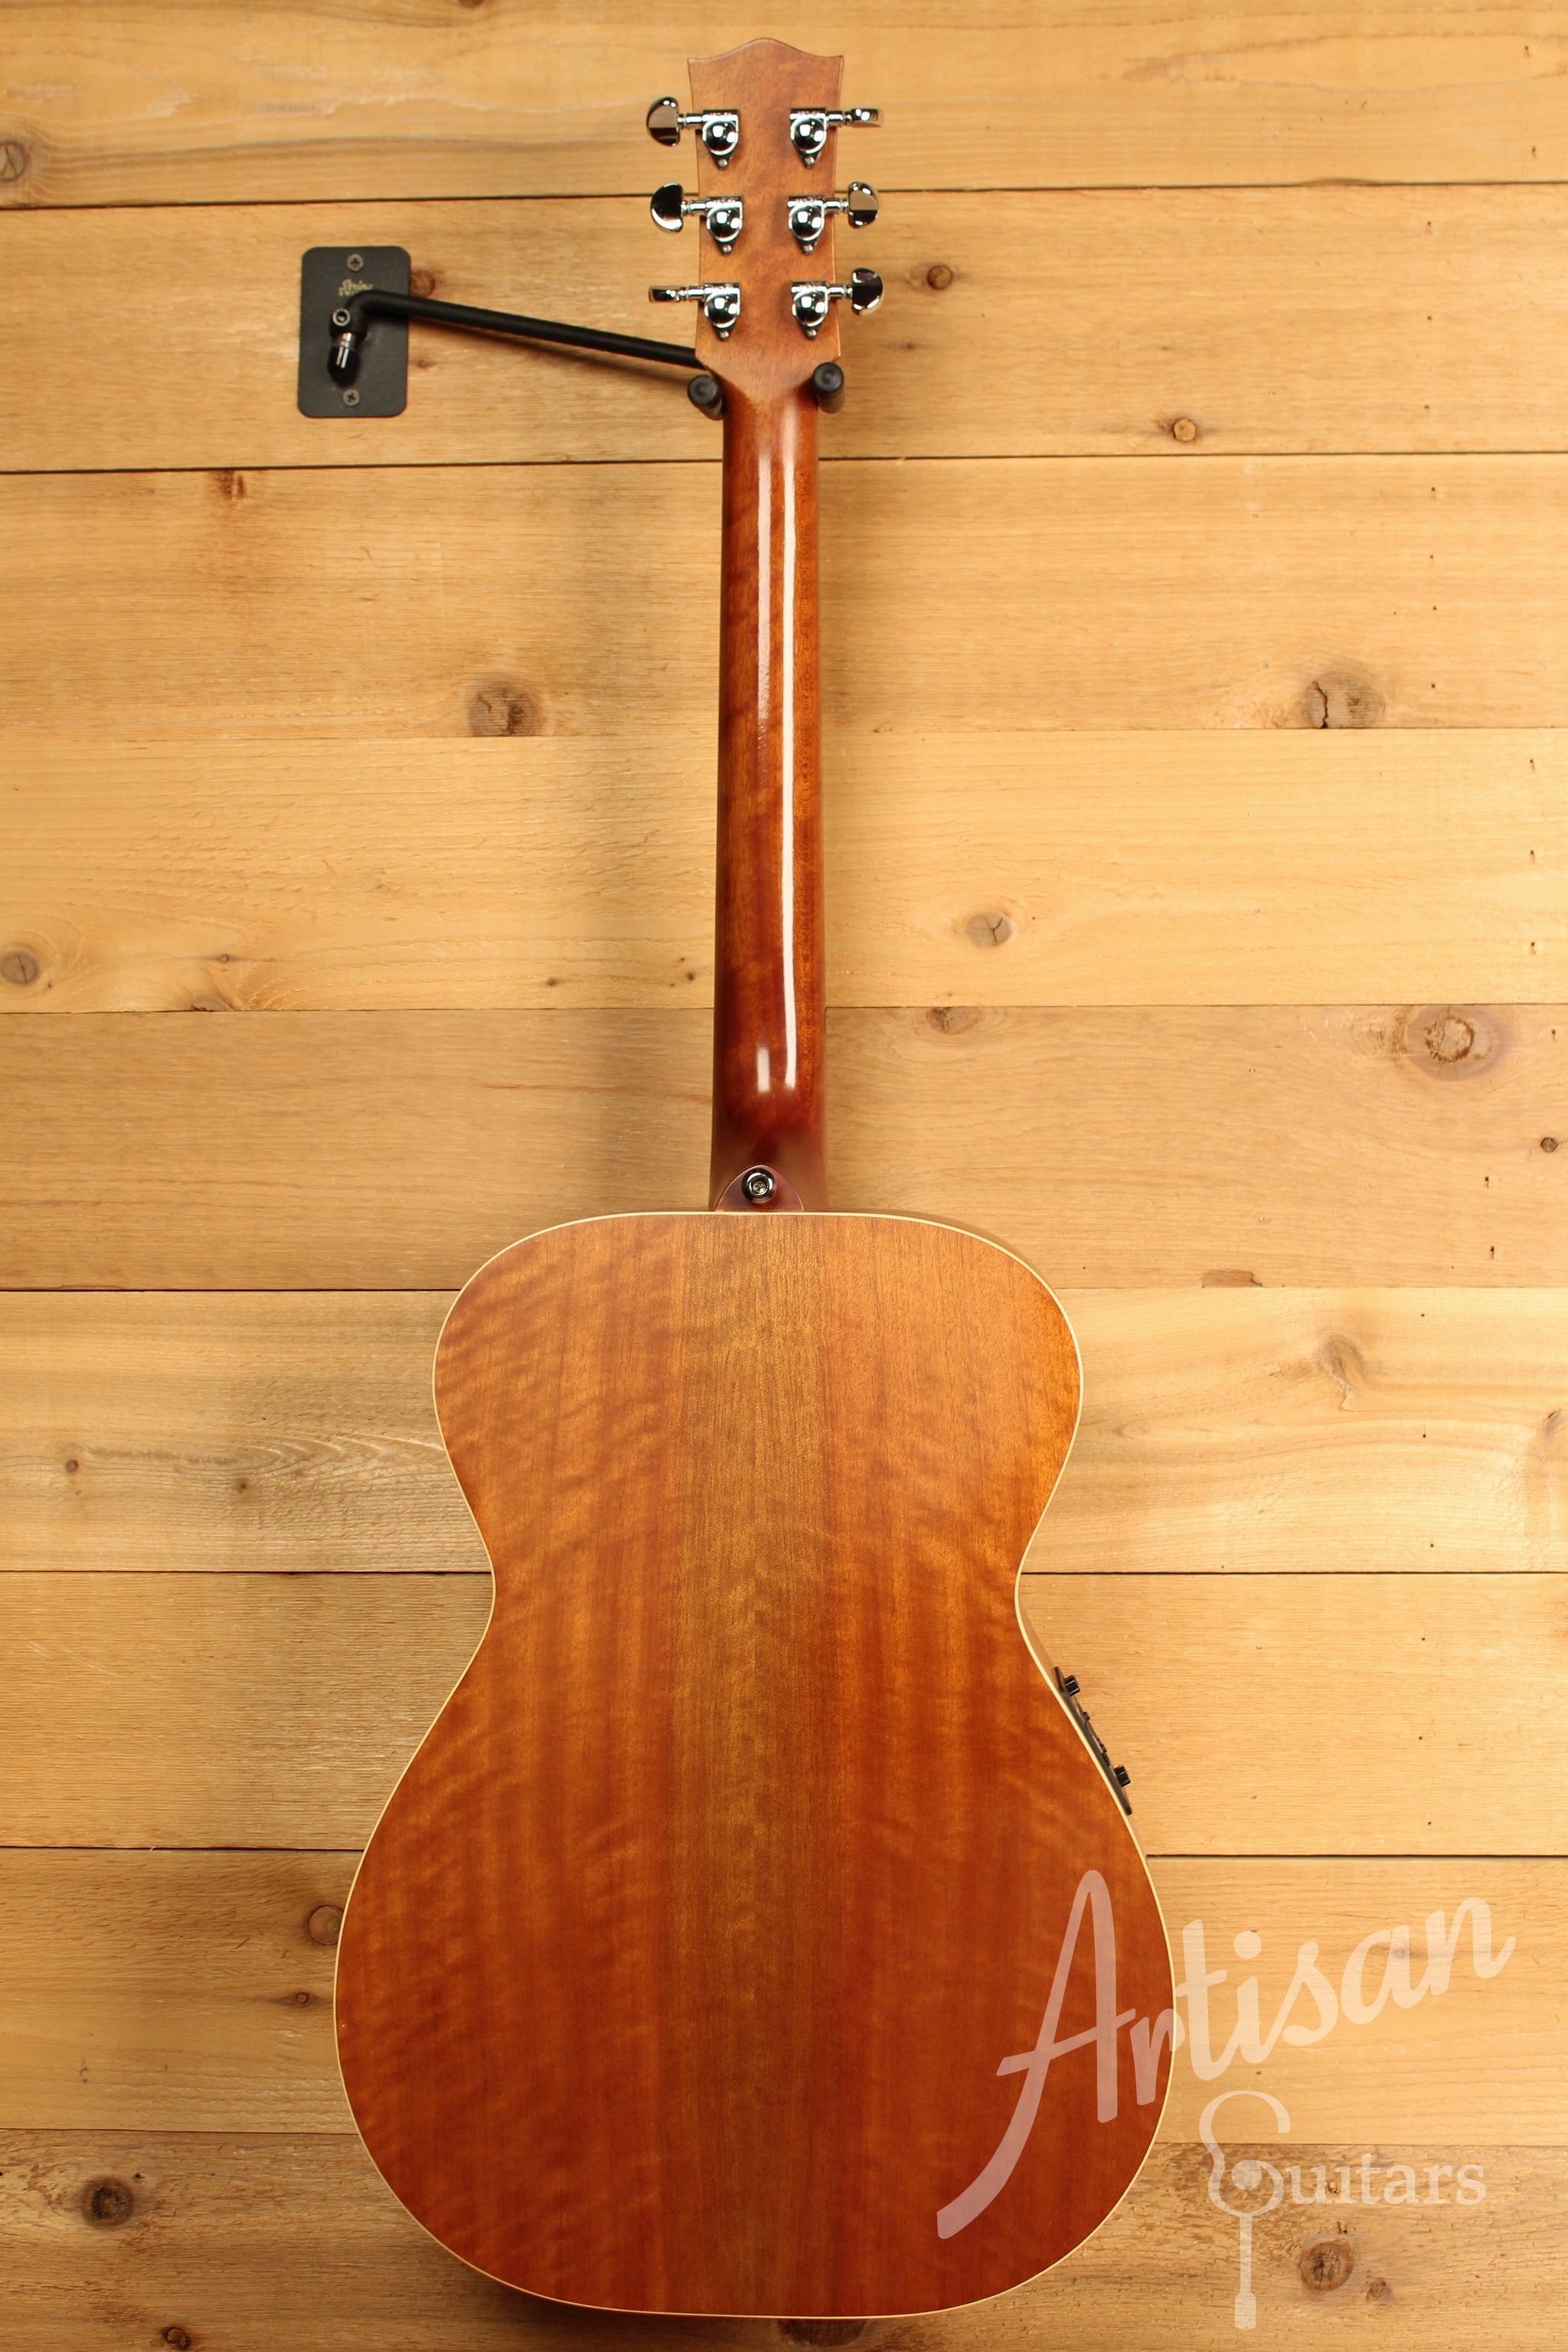 Maton EBG808TE Tommy Emmaunel Signature Sitka and Queensland Maple Pre-Owned 2014 ID-11880 - Artisan Guitars